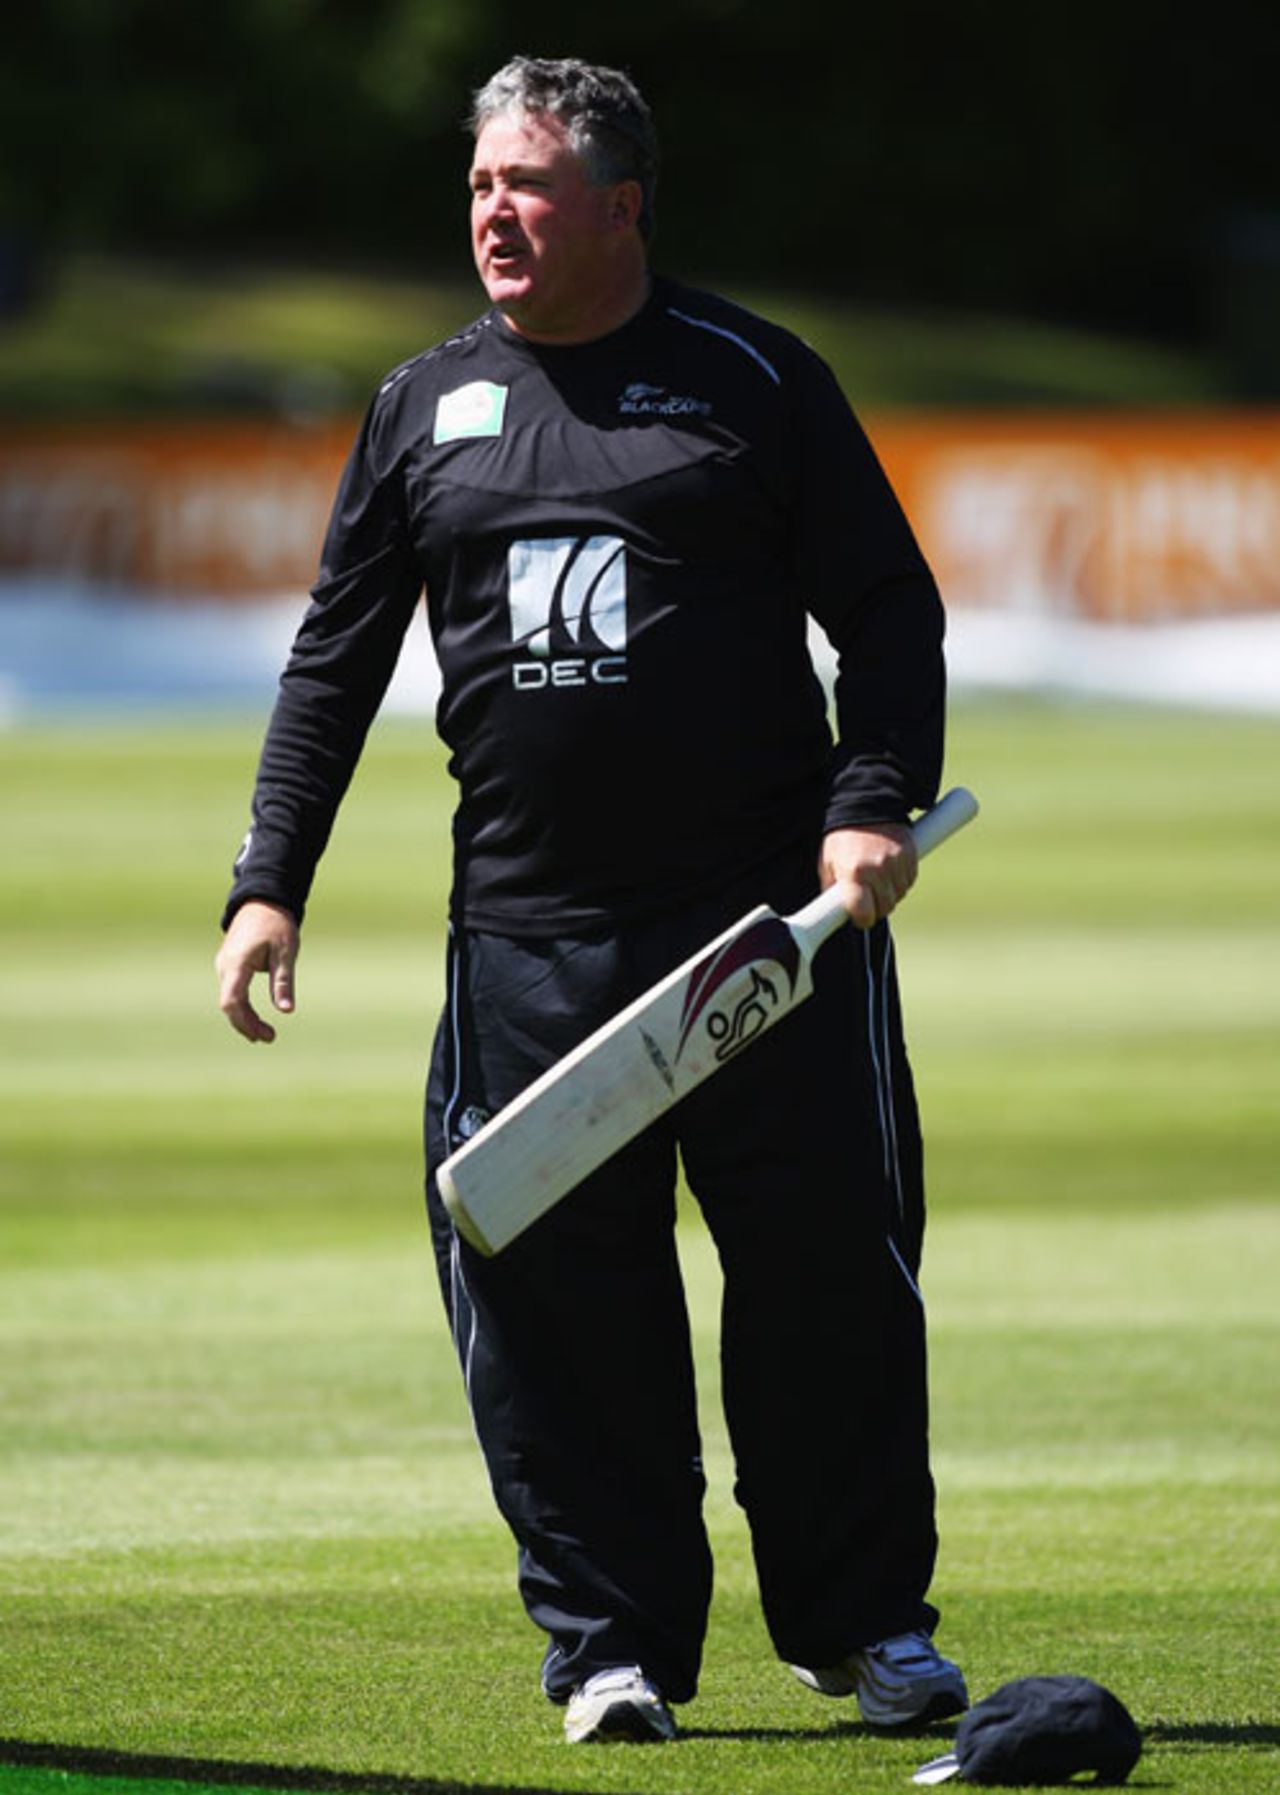 Andy Moles watches his players during a warm-up session before the start of play, New Zealand v West Indies, 1st Test, Dunedin, 1st day, December 11, 2008